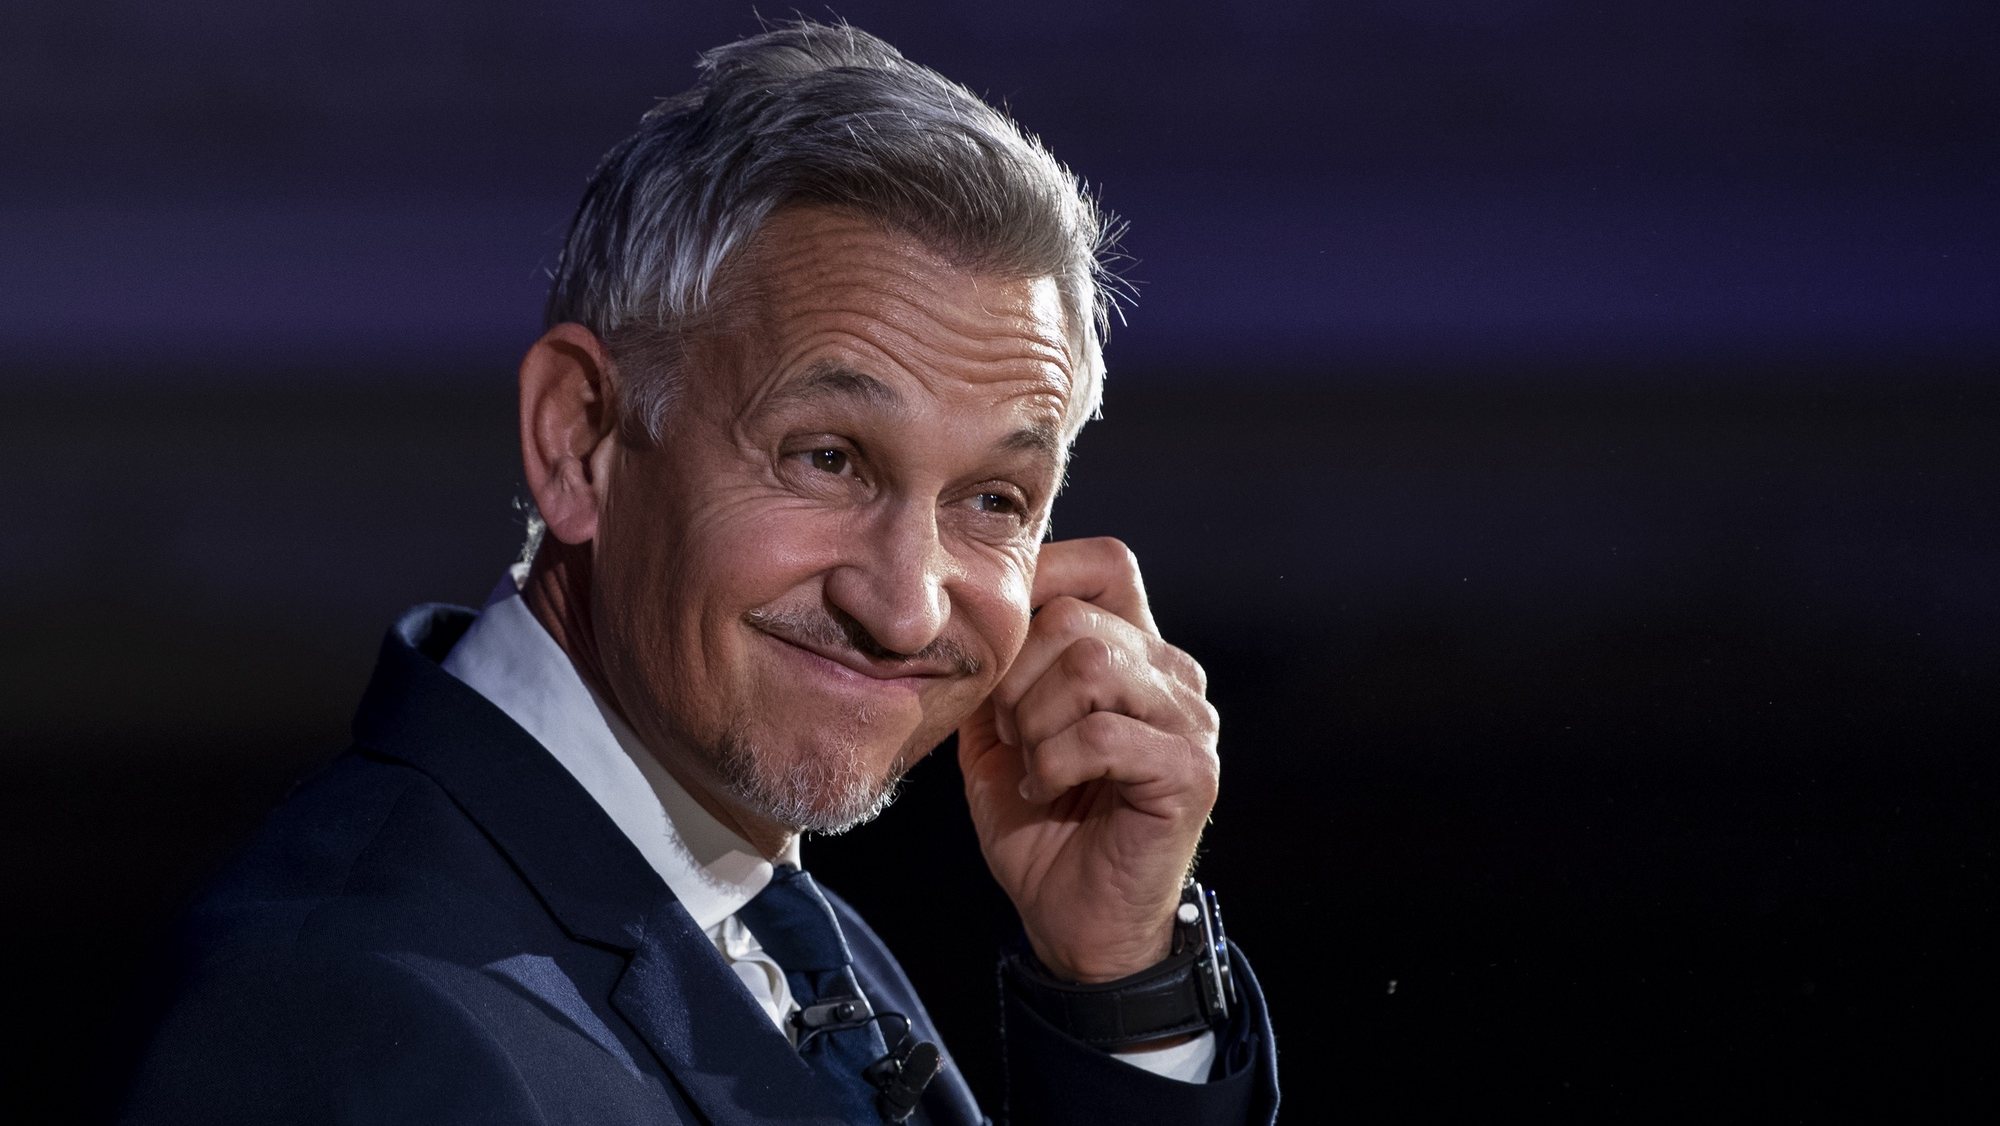 epa07163638 Television presenter and former footballer Gary Lineker attends a &#039;People&#039;s Vote&#039; Rally in Central London, Britain, 13 November 2018. The rally held by anti-Brexit groups &#039;Best for Britain&#039; and &#039;The People&#039;s Vote Campaign&#039; comes as reports suggest British Prime Minister Theresa May has secured a breakthrough in Brexit negotiations and is seeking the approval of ministers ahead of a cabinet meeting tomorrow.  EPA/WILL OLIVER